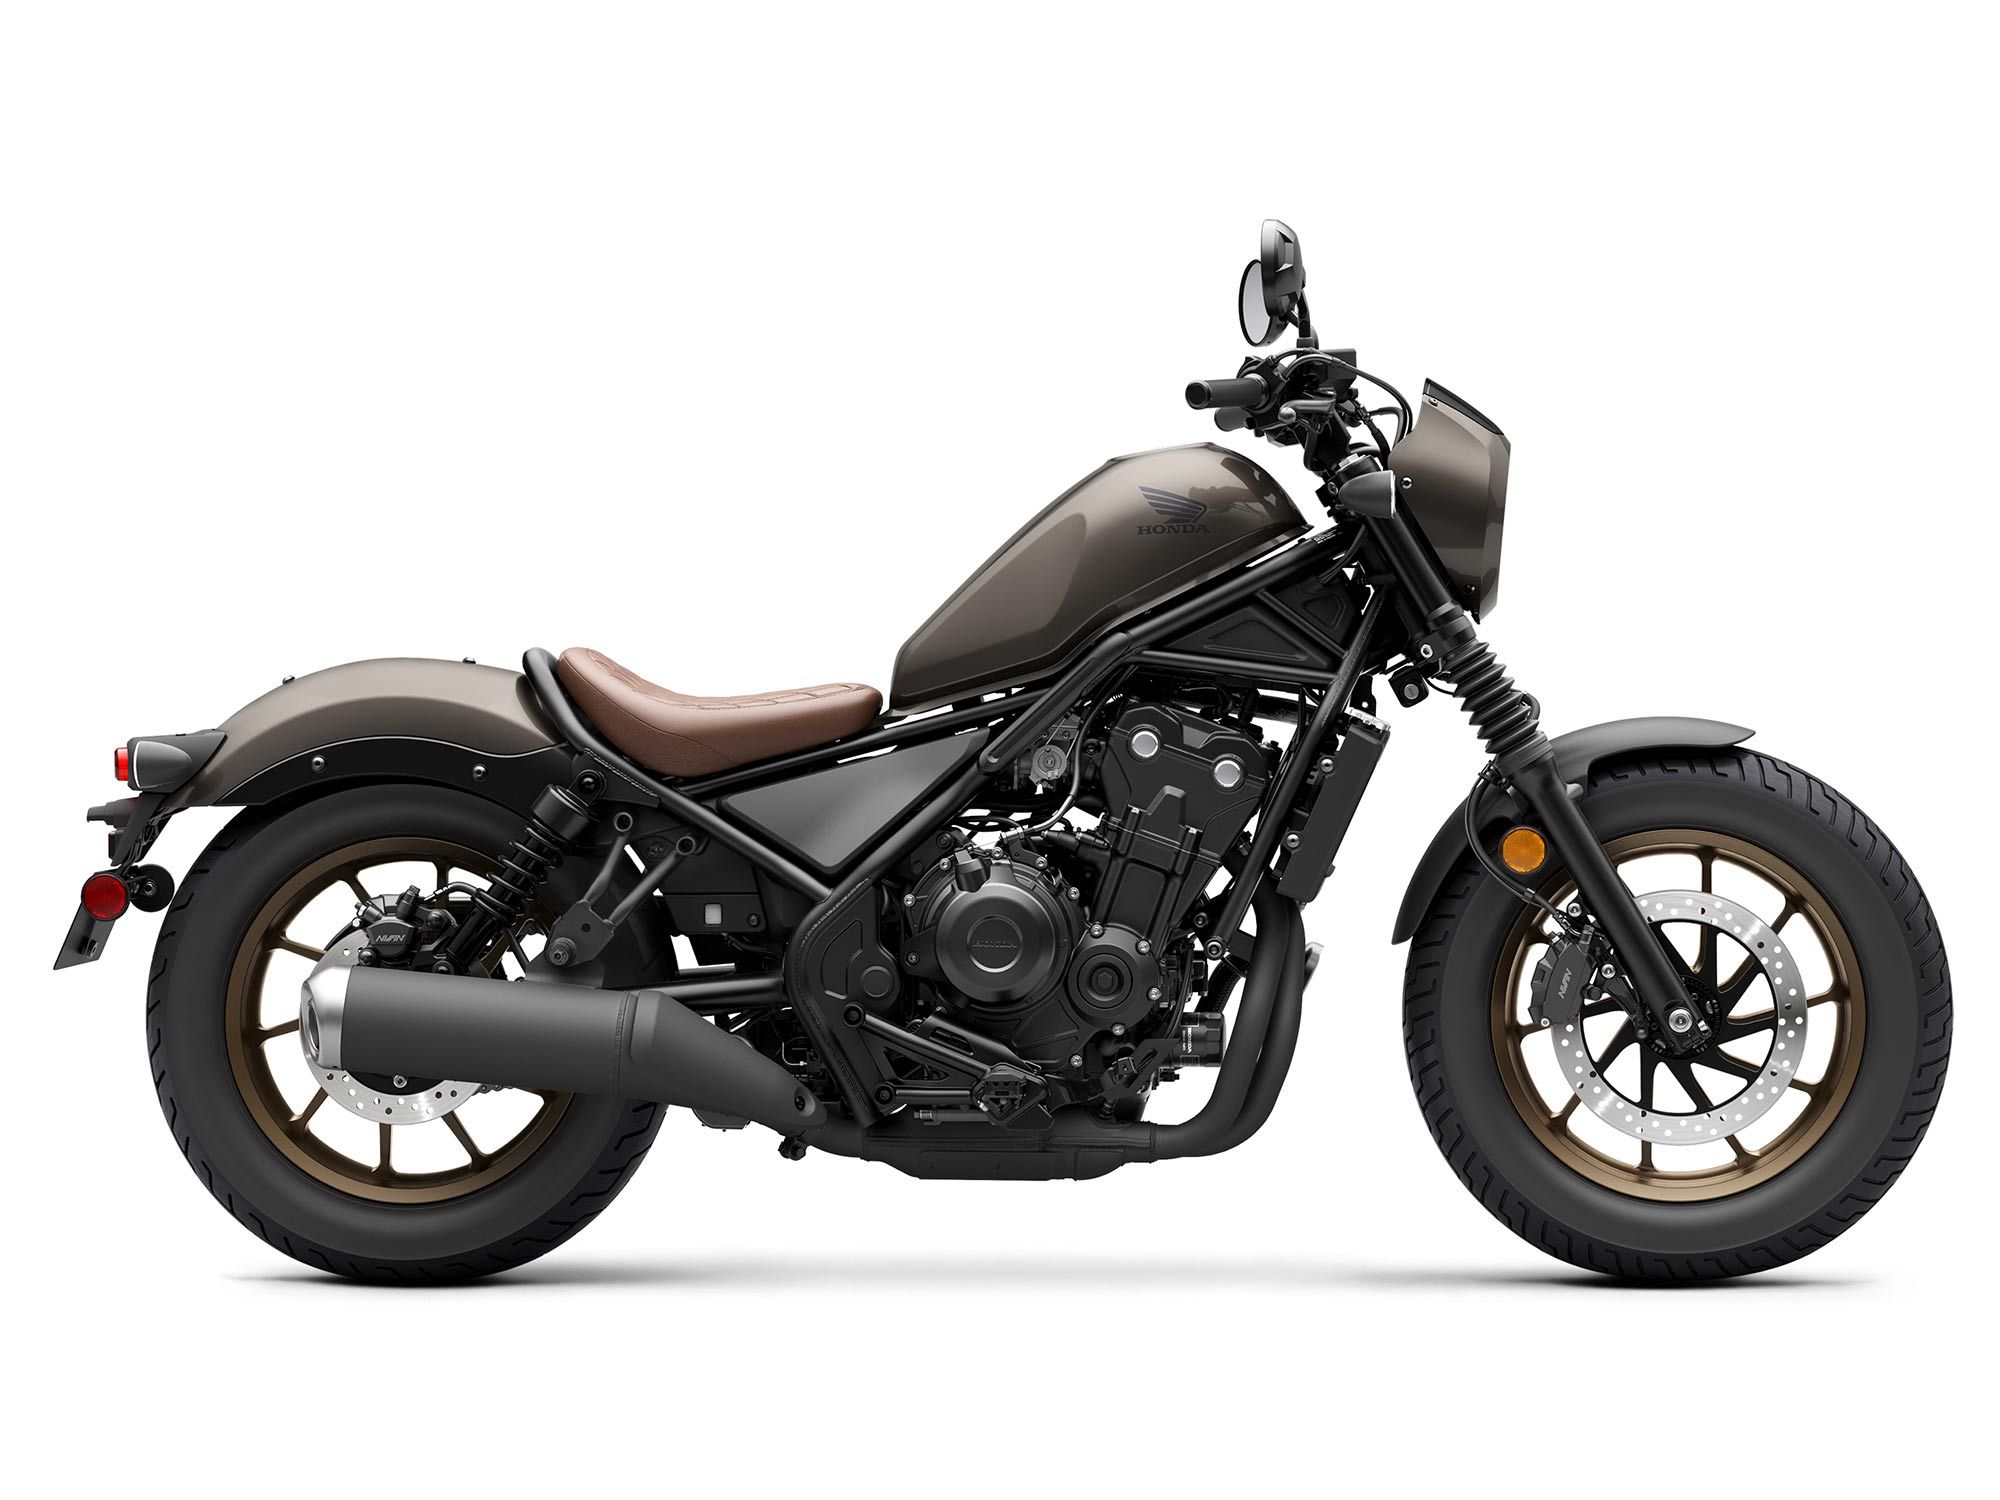 The Rebel 500 ABS SE has a number of accessory upgrades and will come in a Titanium Metallic colorway.